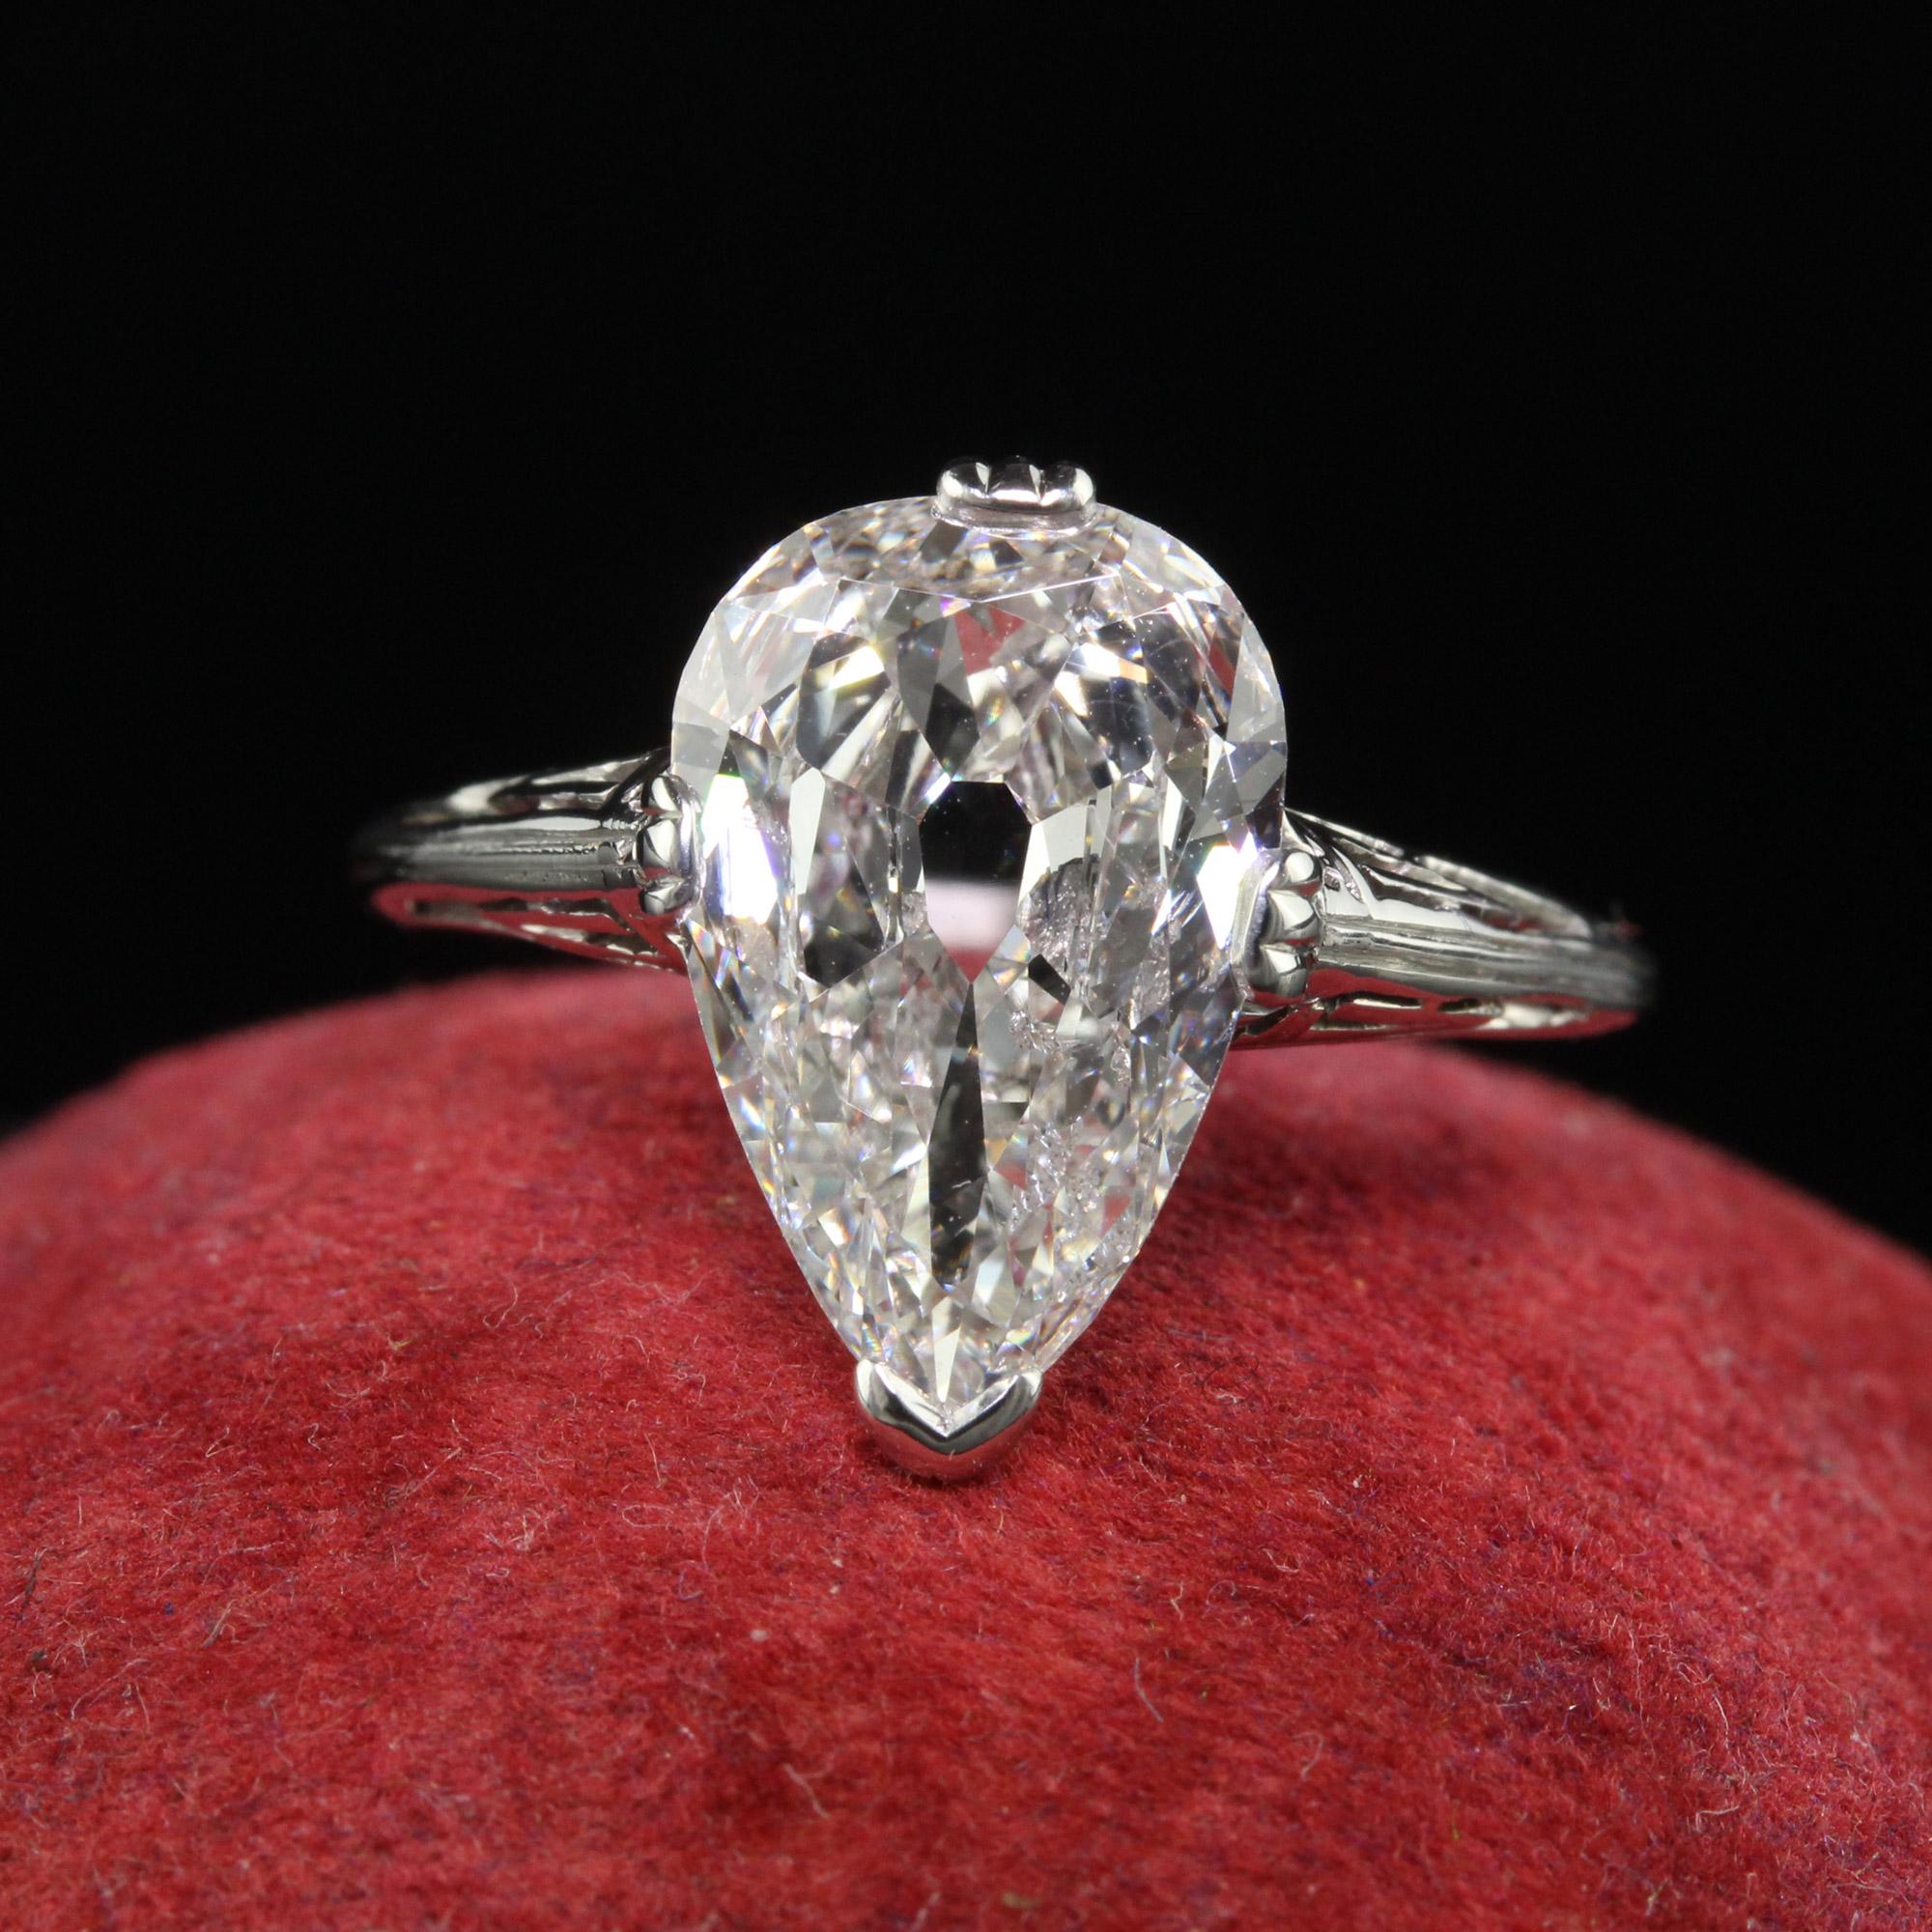 Beautiful Antique Art Deco Marcus and Co Platinum Old Pear Diamond Engagement Ring - GIA. This incredible antique Marcus and Co engagement ring is crafted in platinum. The center holds a gorgeous old pear shape diamond that looks larger than it is